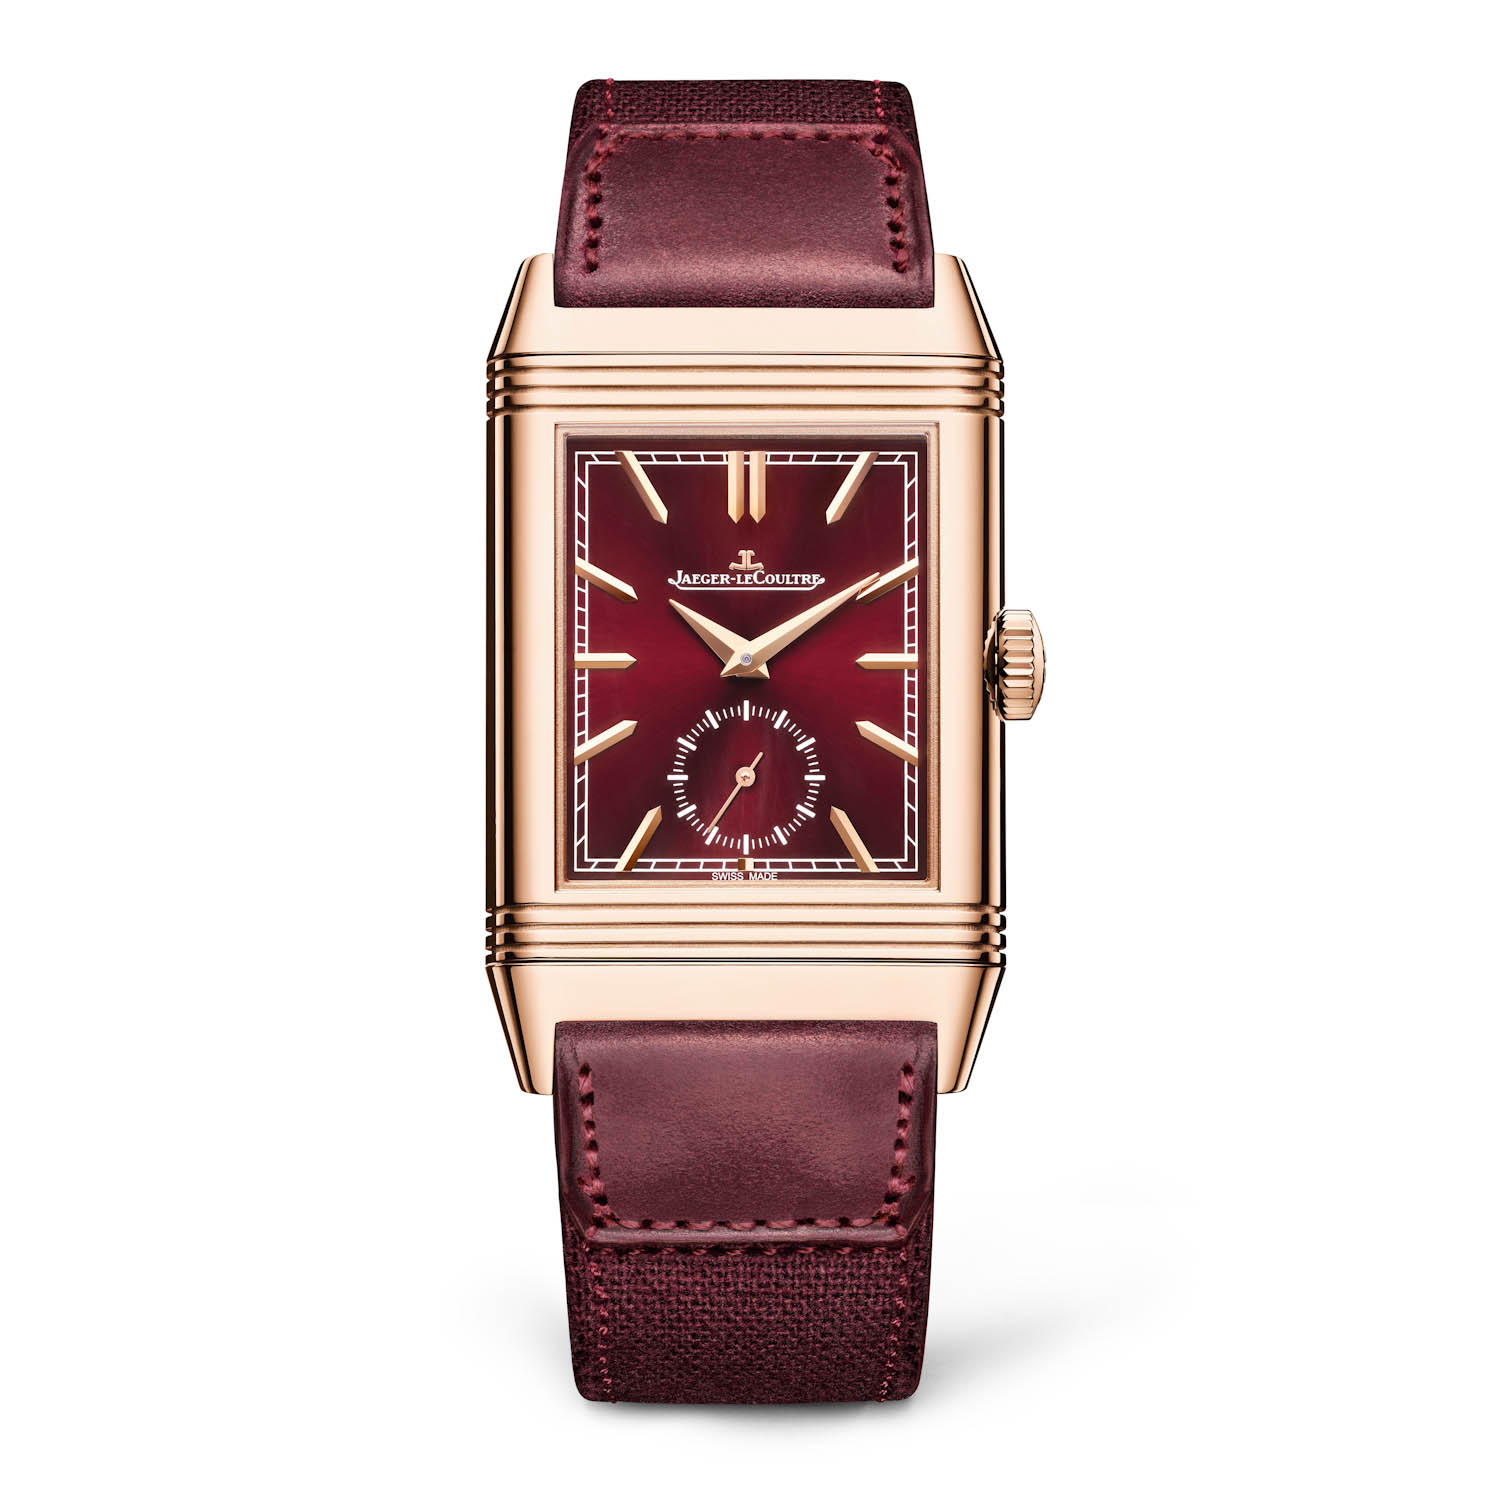 Reverso Tribute Duoface Fagliano timeandwatches.pl